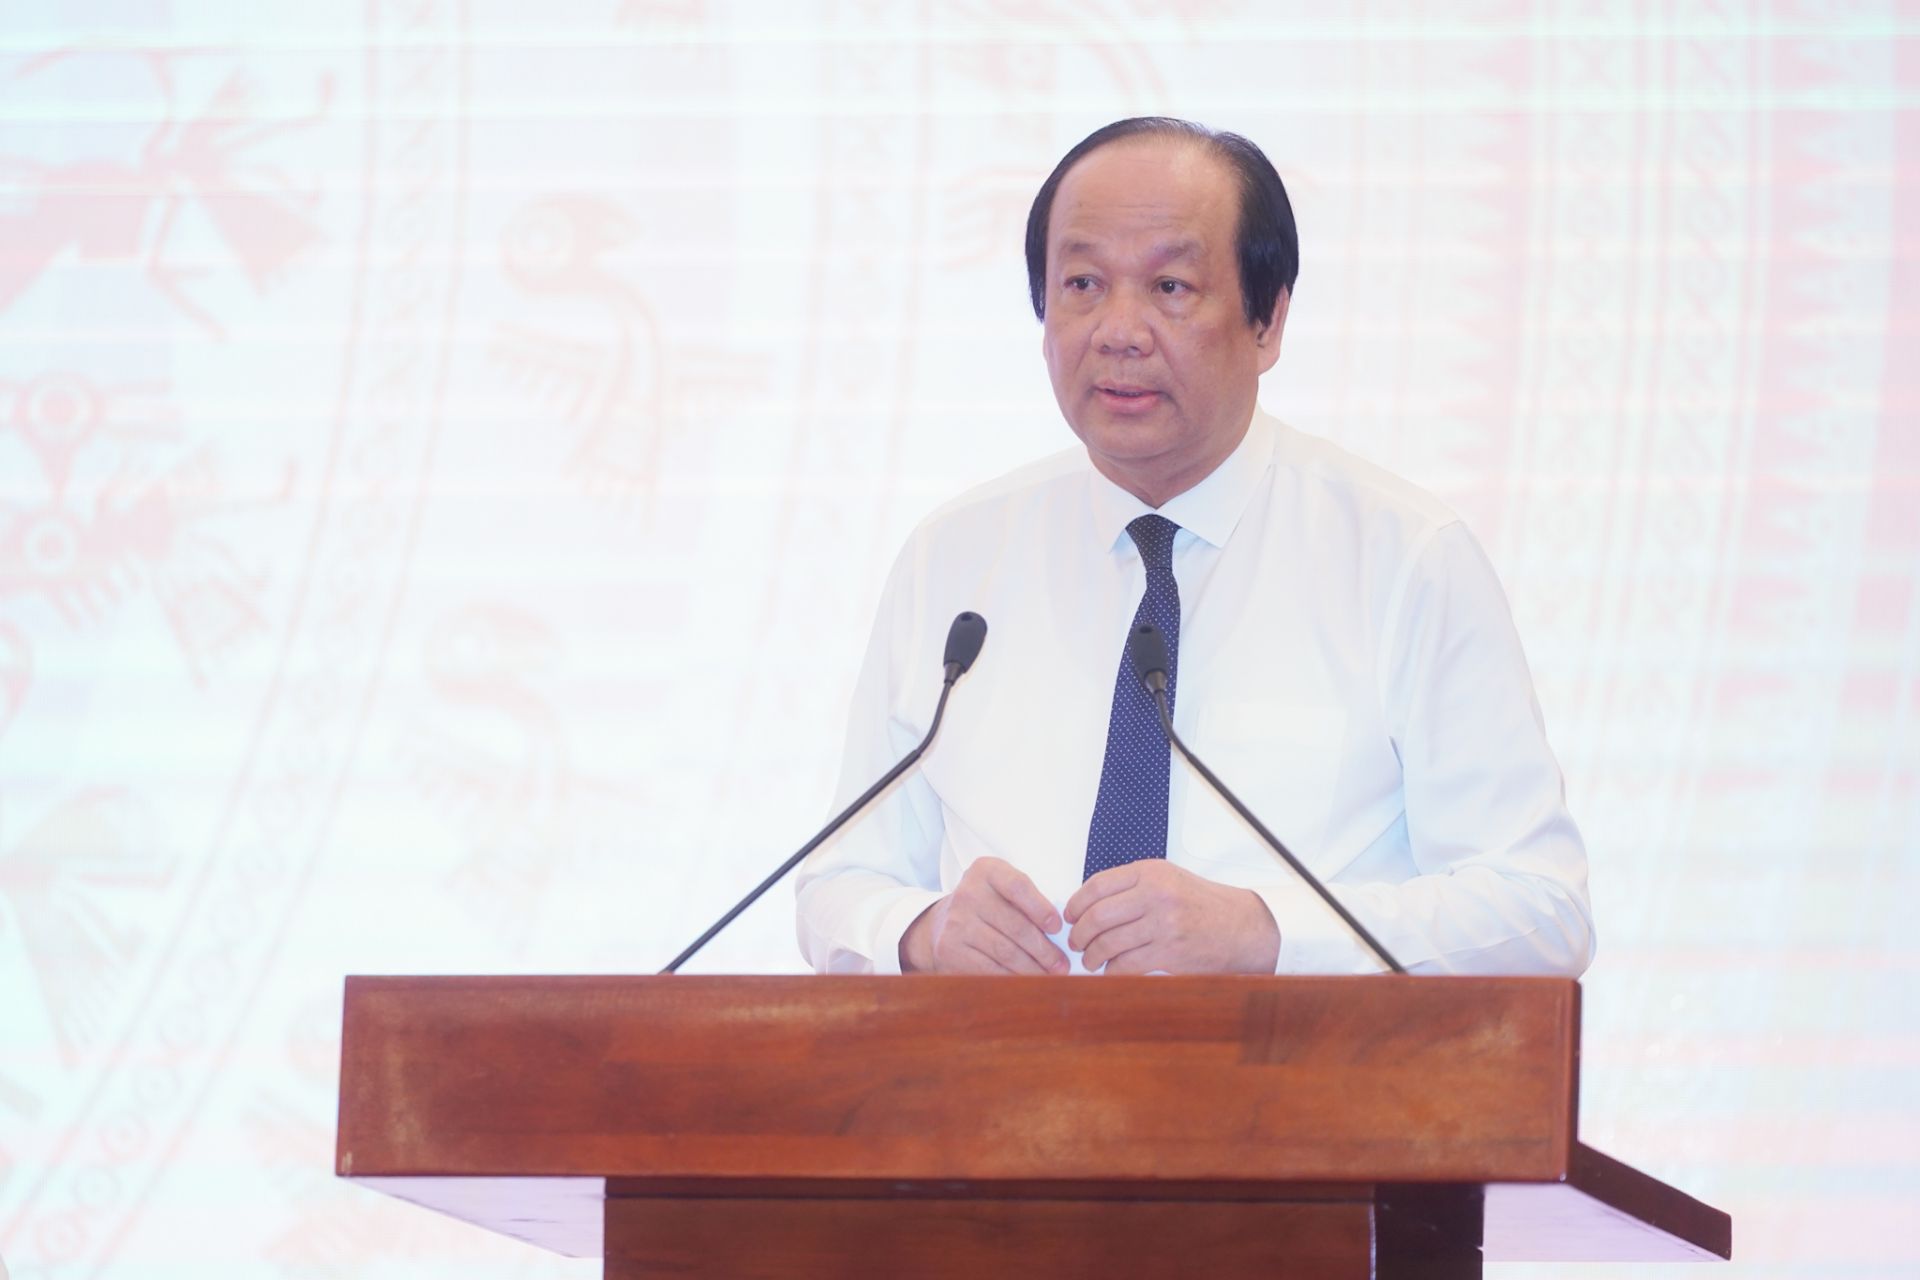 Vietnam has ‘golden opportunity’ to reactivate economy after COVID-19 pandemic: Official